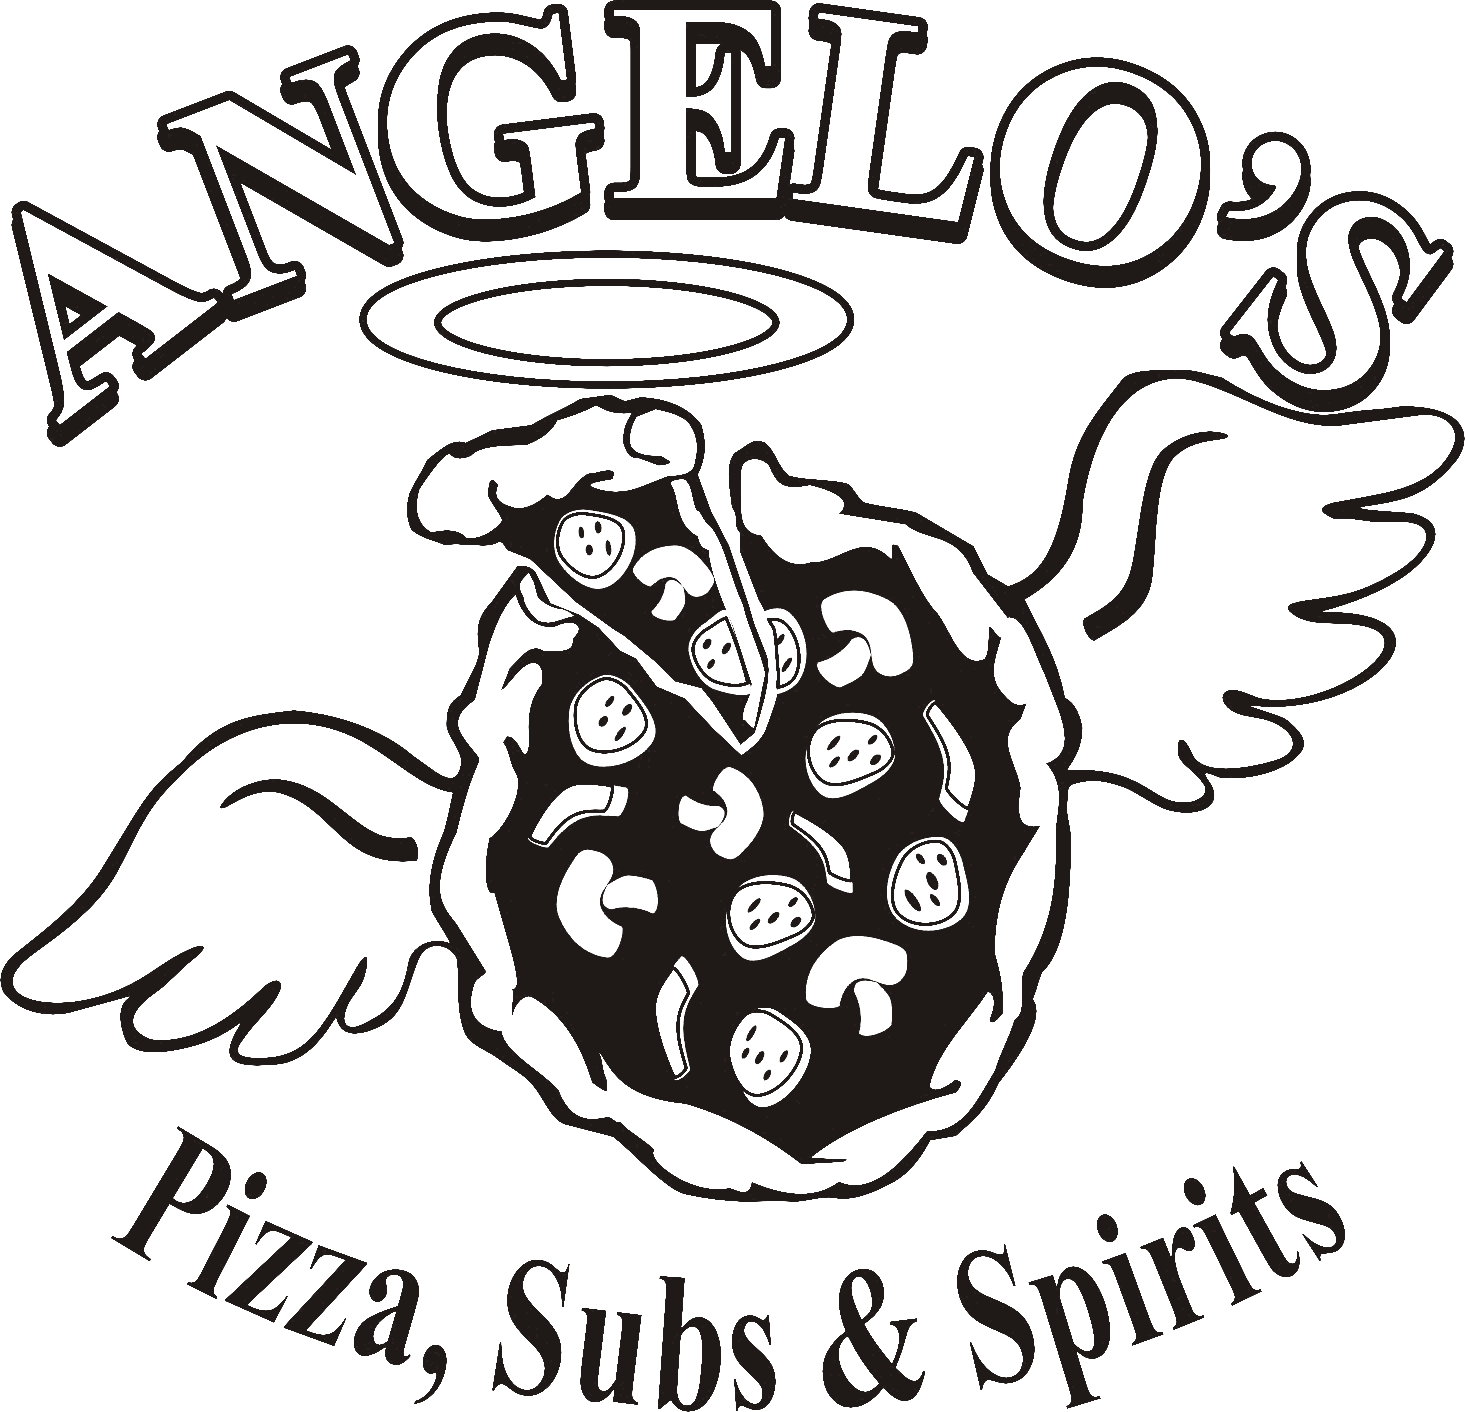 Angelo's Grill & Bar Home